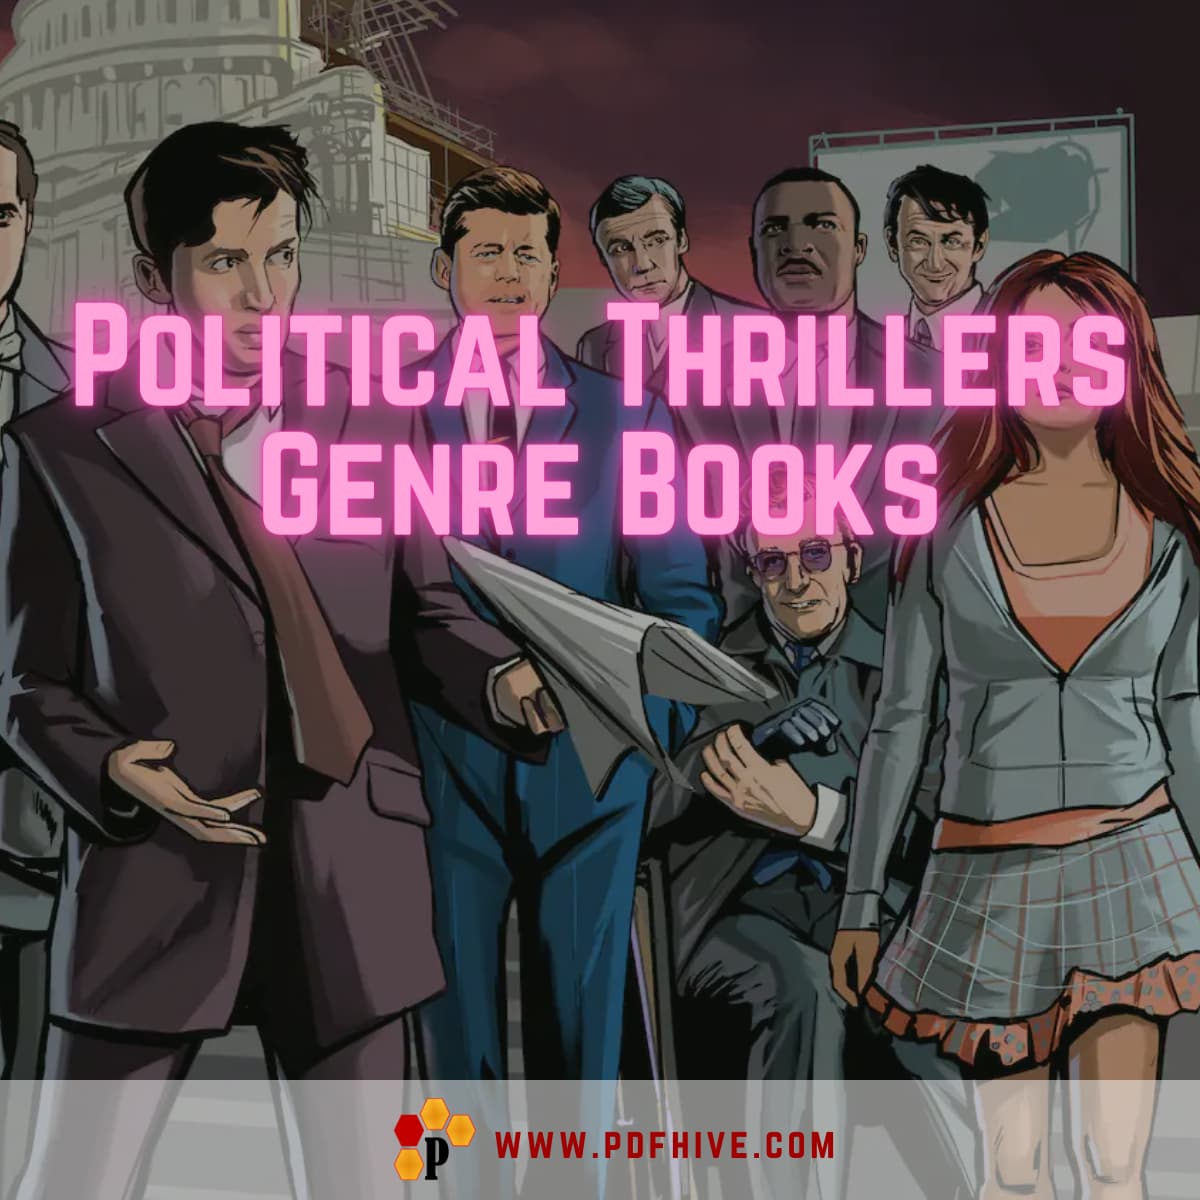 What are Political Thrillers genre books? Political thrillers are a genre of books that explore the world of politics and the machinations of those in power.